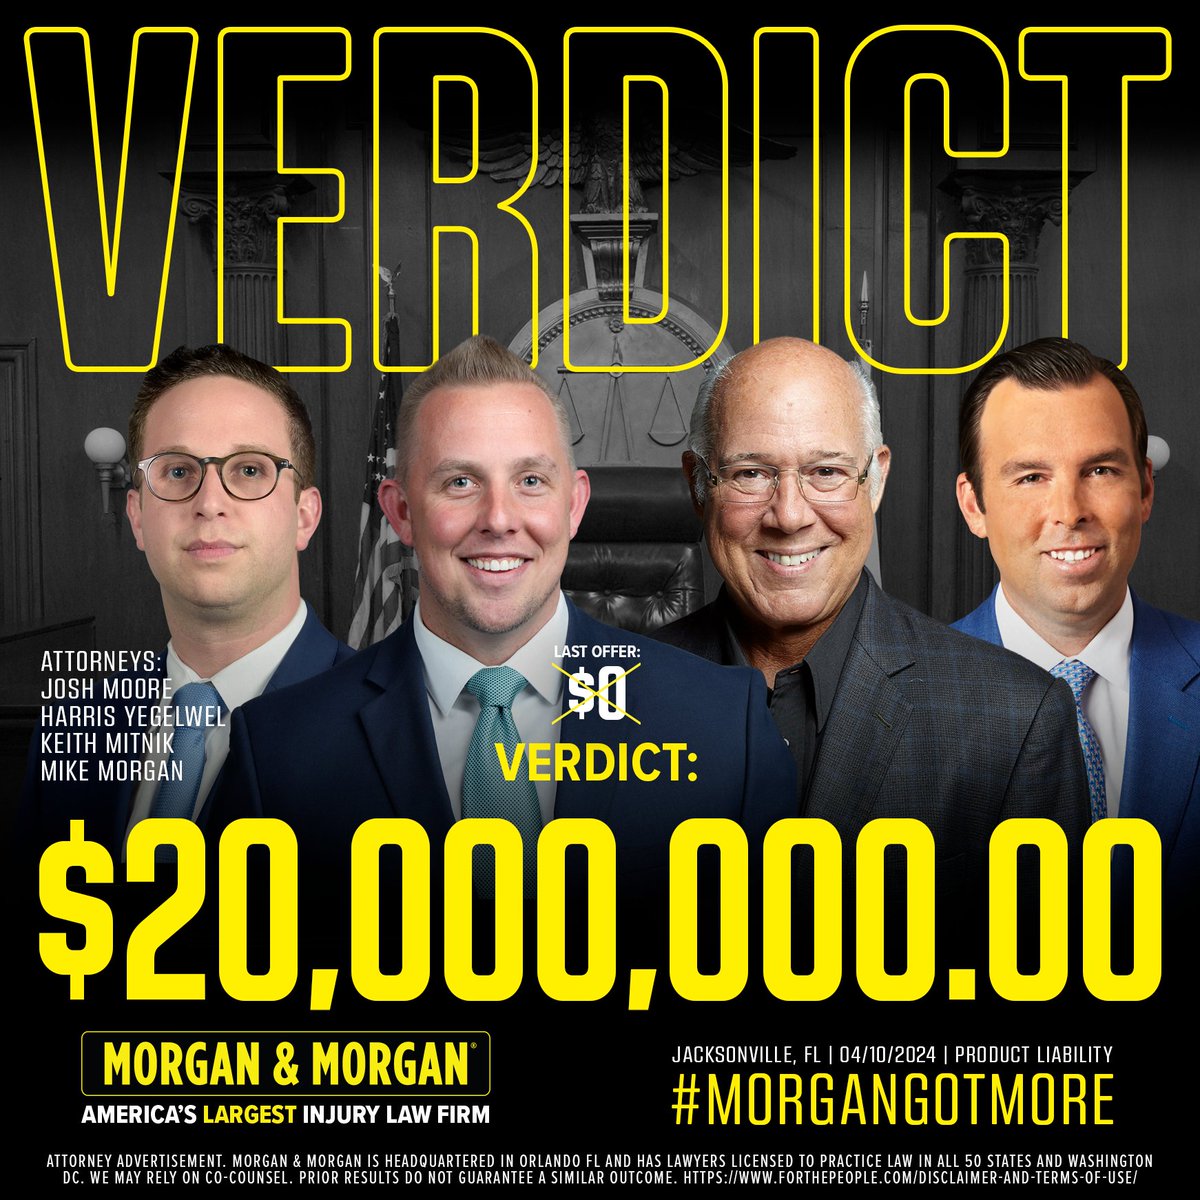 🚨 #VerdictAlert: Josh Moore, Harris Yegelwel, Keith Mitnik and Mike Morgan just received a $20,000,000.00 verdict for our client in Jacksonville! The last offer was $0. That’s #MorganMath 💪 #ForThePeople #MorganGotMore